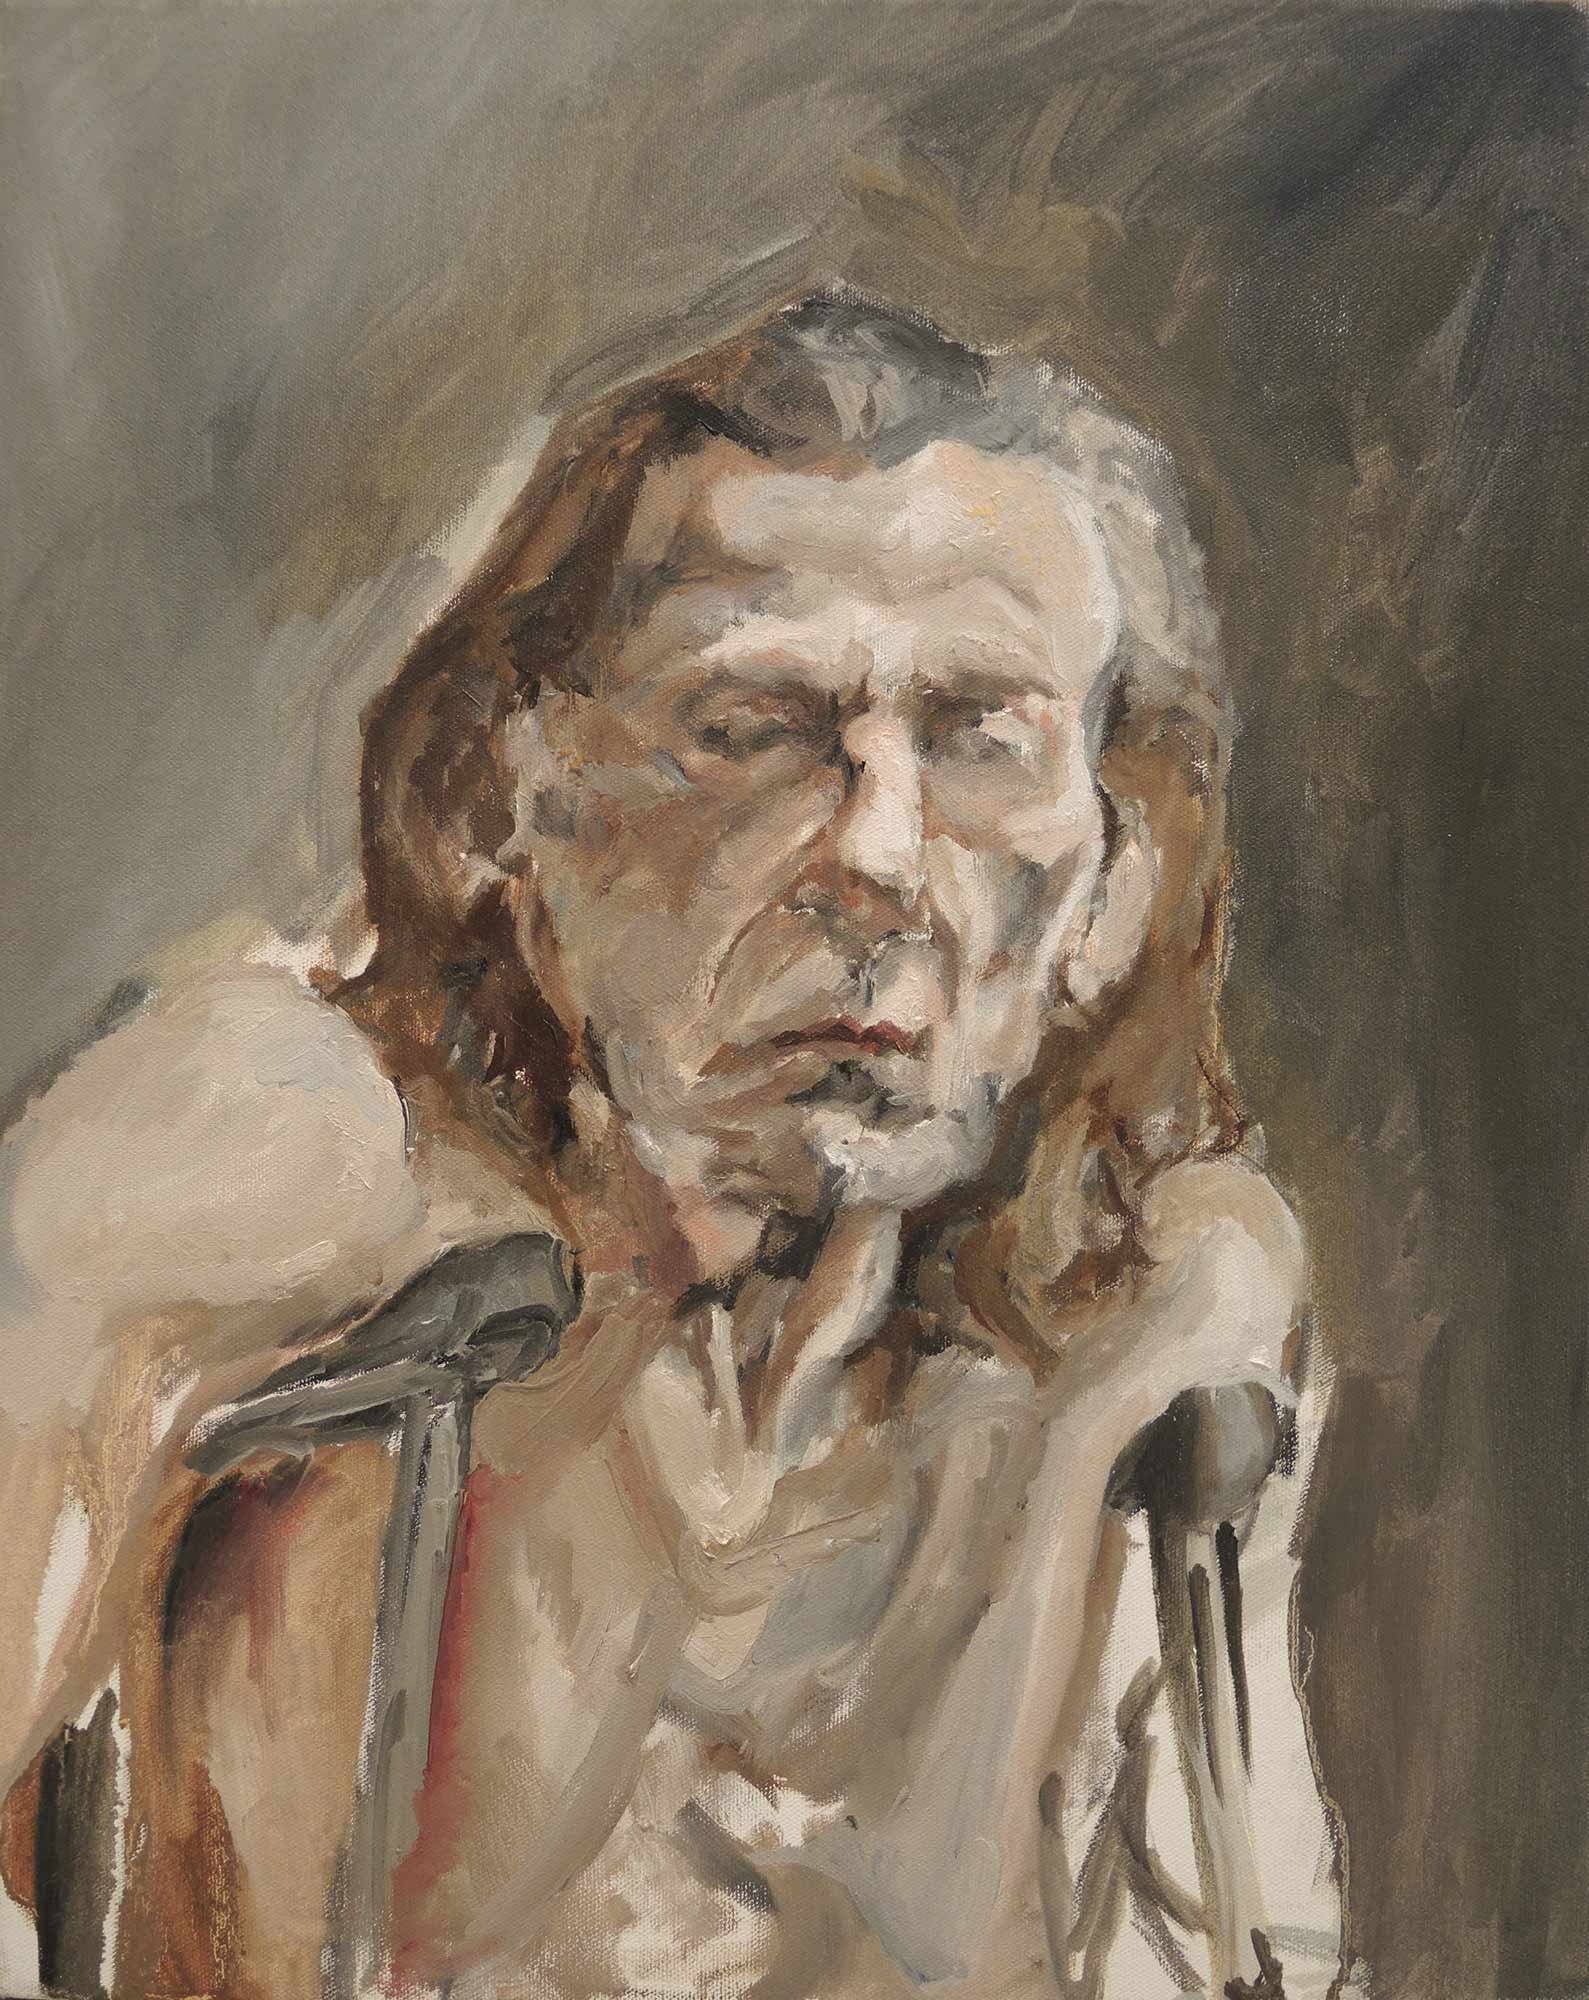 A painting of a man on crutches